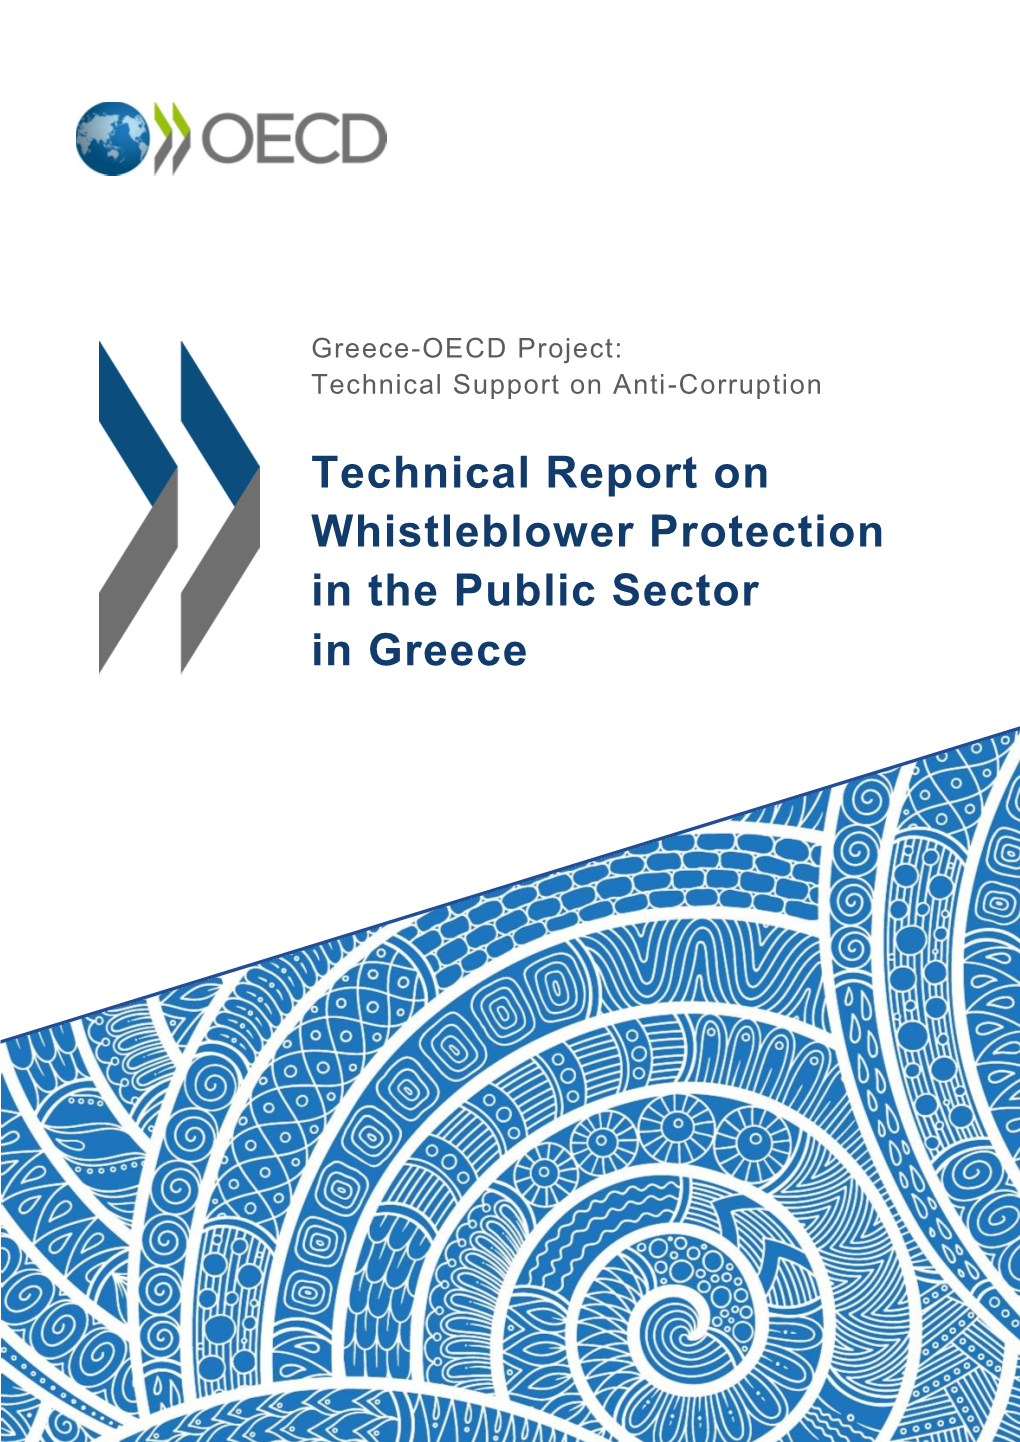 Technical Report on Whistleblower Protection in the Public Sector in Greece